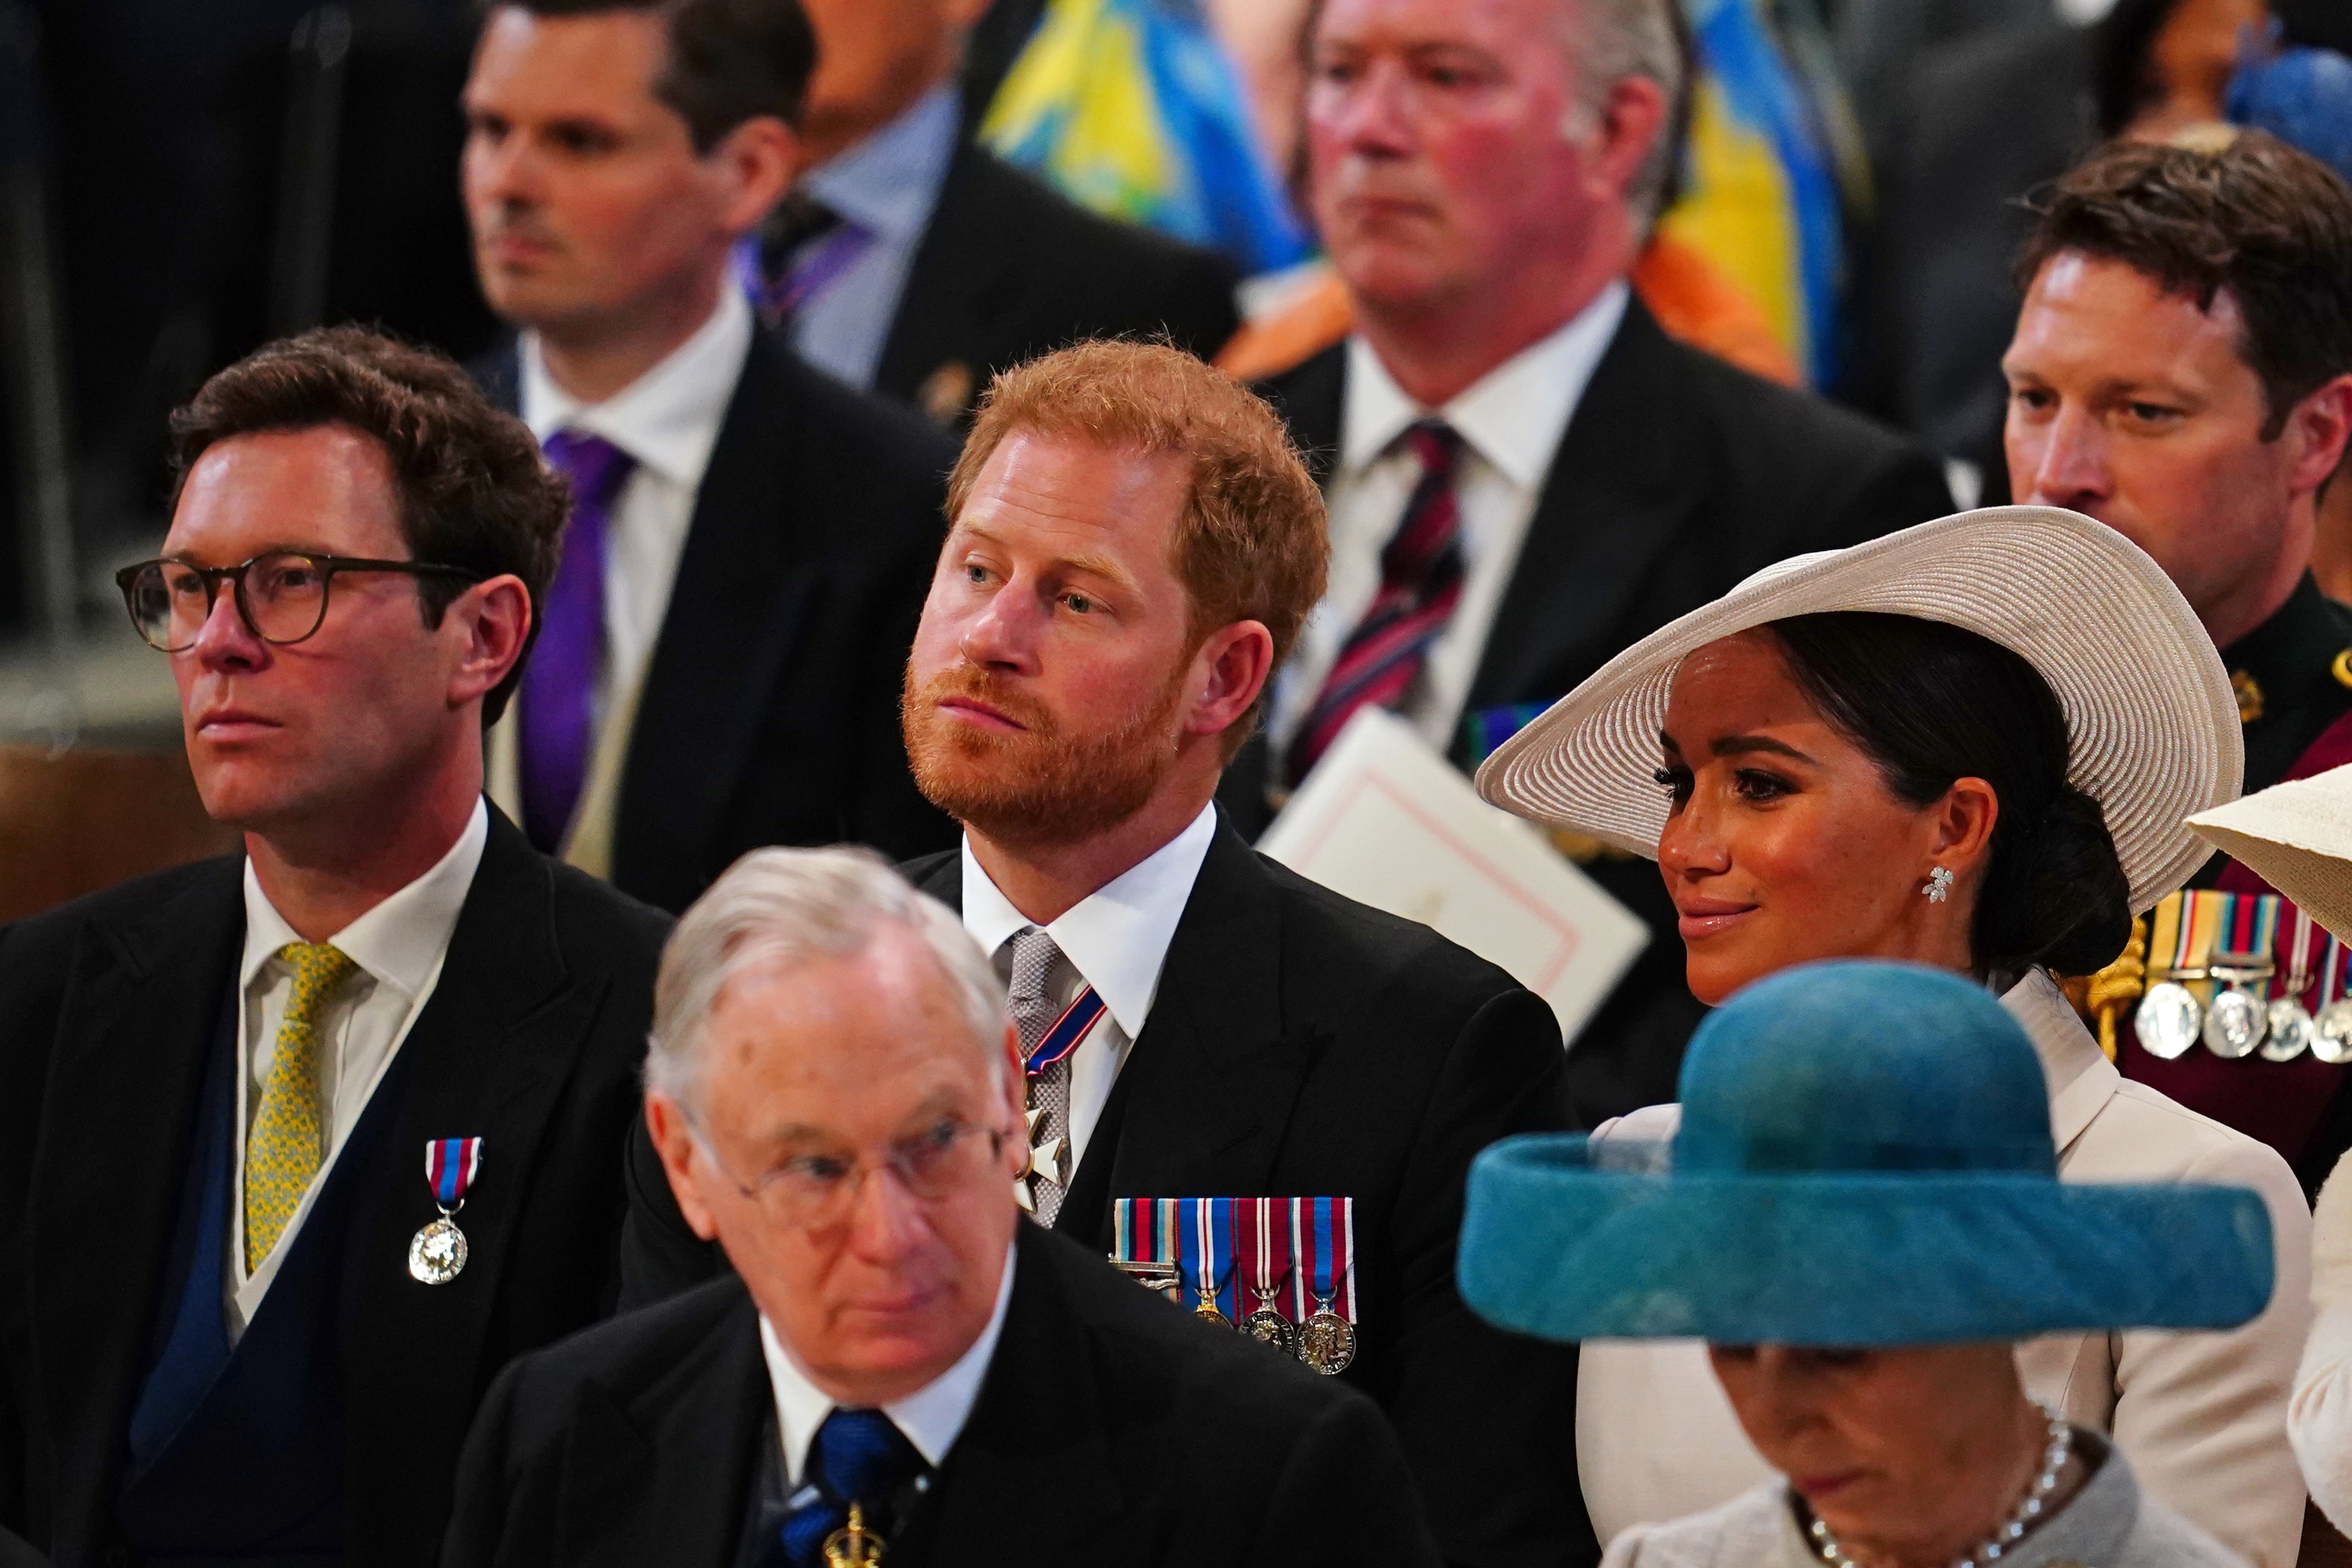 The Duke and Duchess of Sussex during the National Service of Thanksgiving in London at the Queen's Platinum Jubilee celebrations on June 3, 2022. | Source: Getty Images